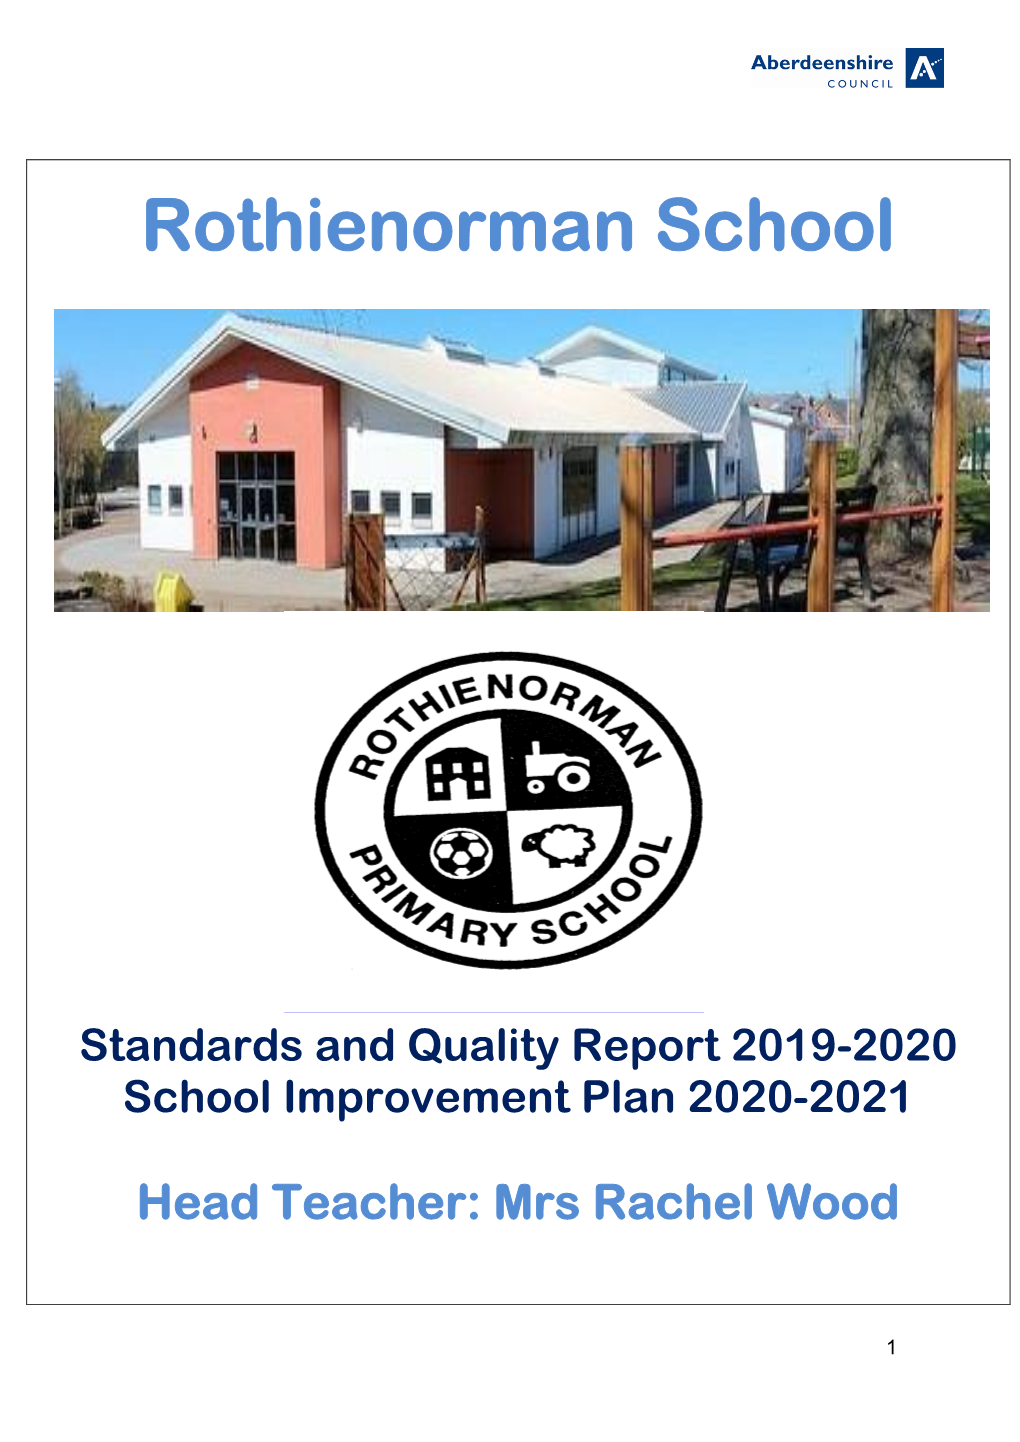 Standards and Quality Report 2019-2020 School Improvement Plan 2020-2021